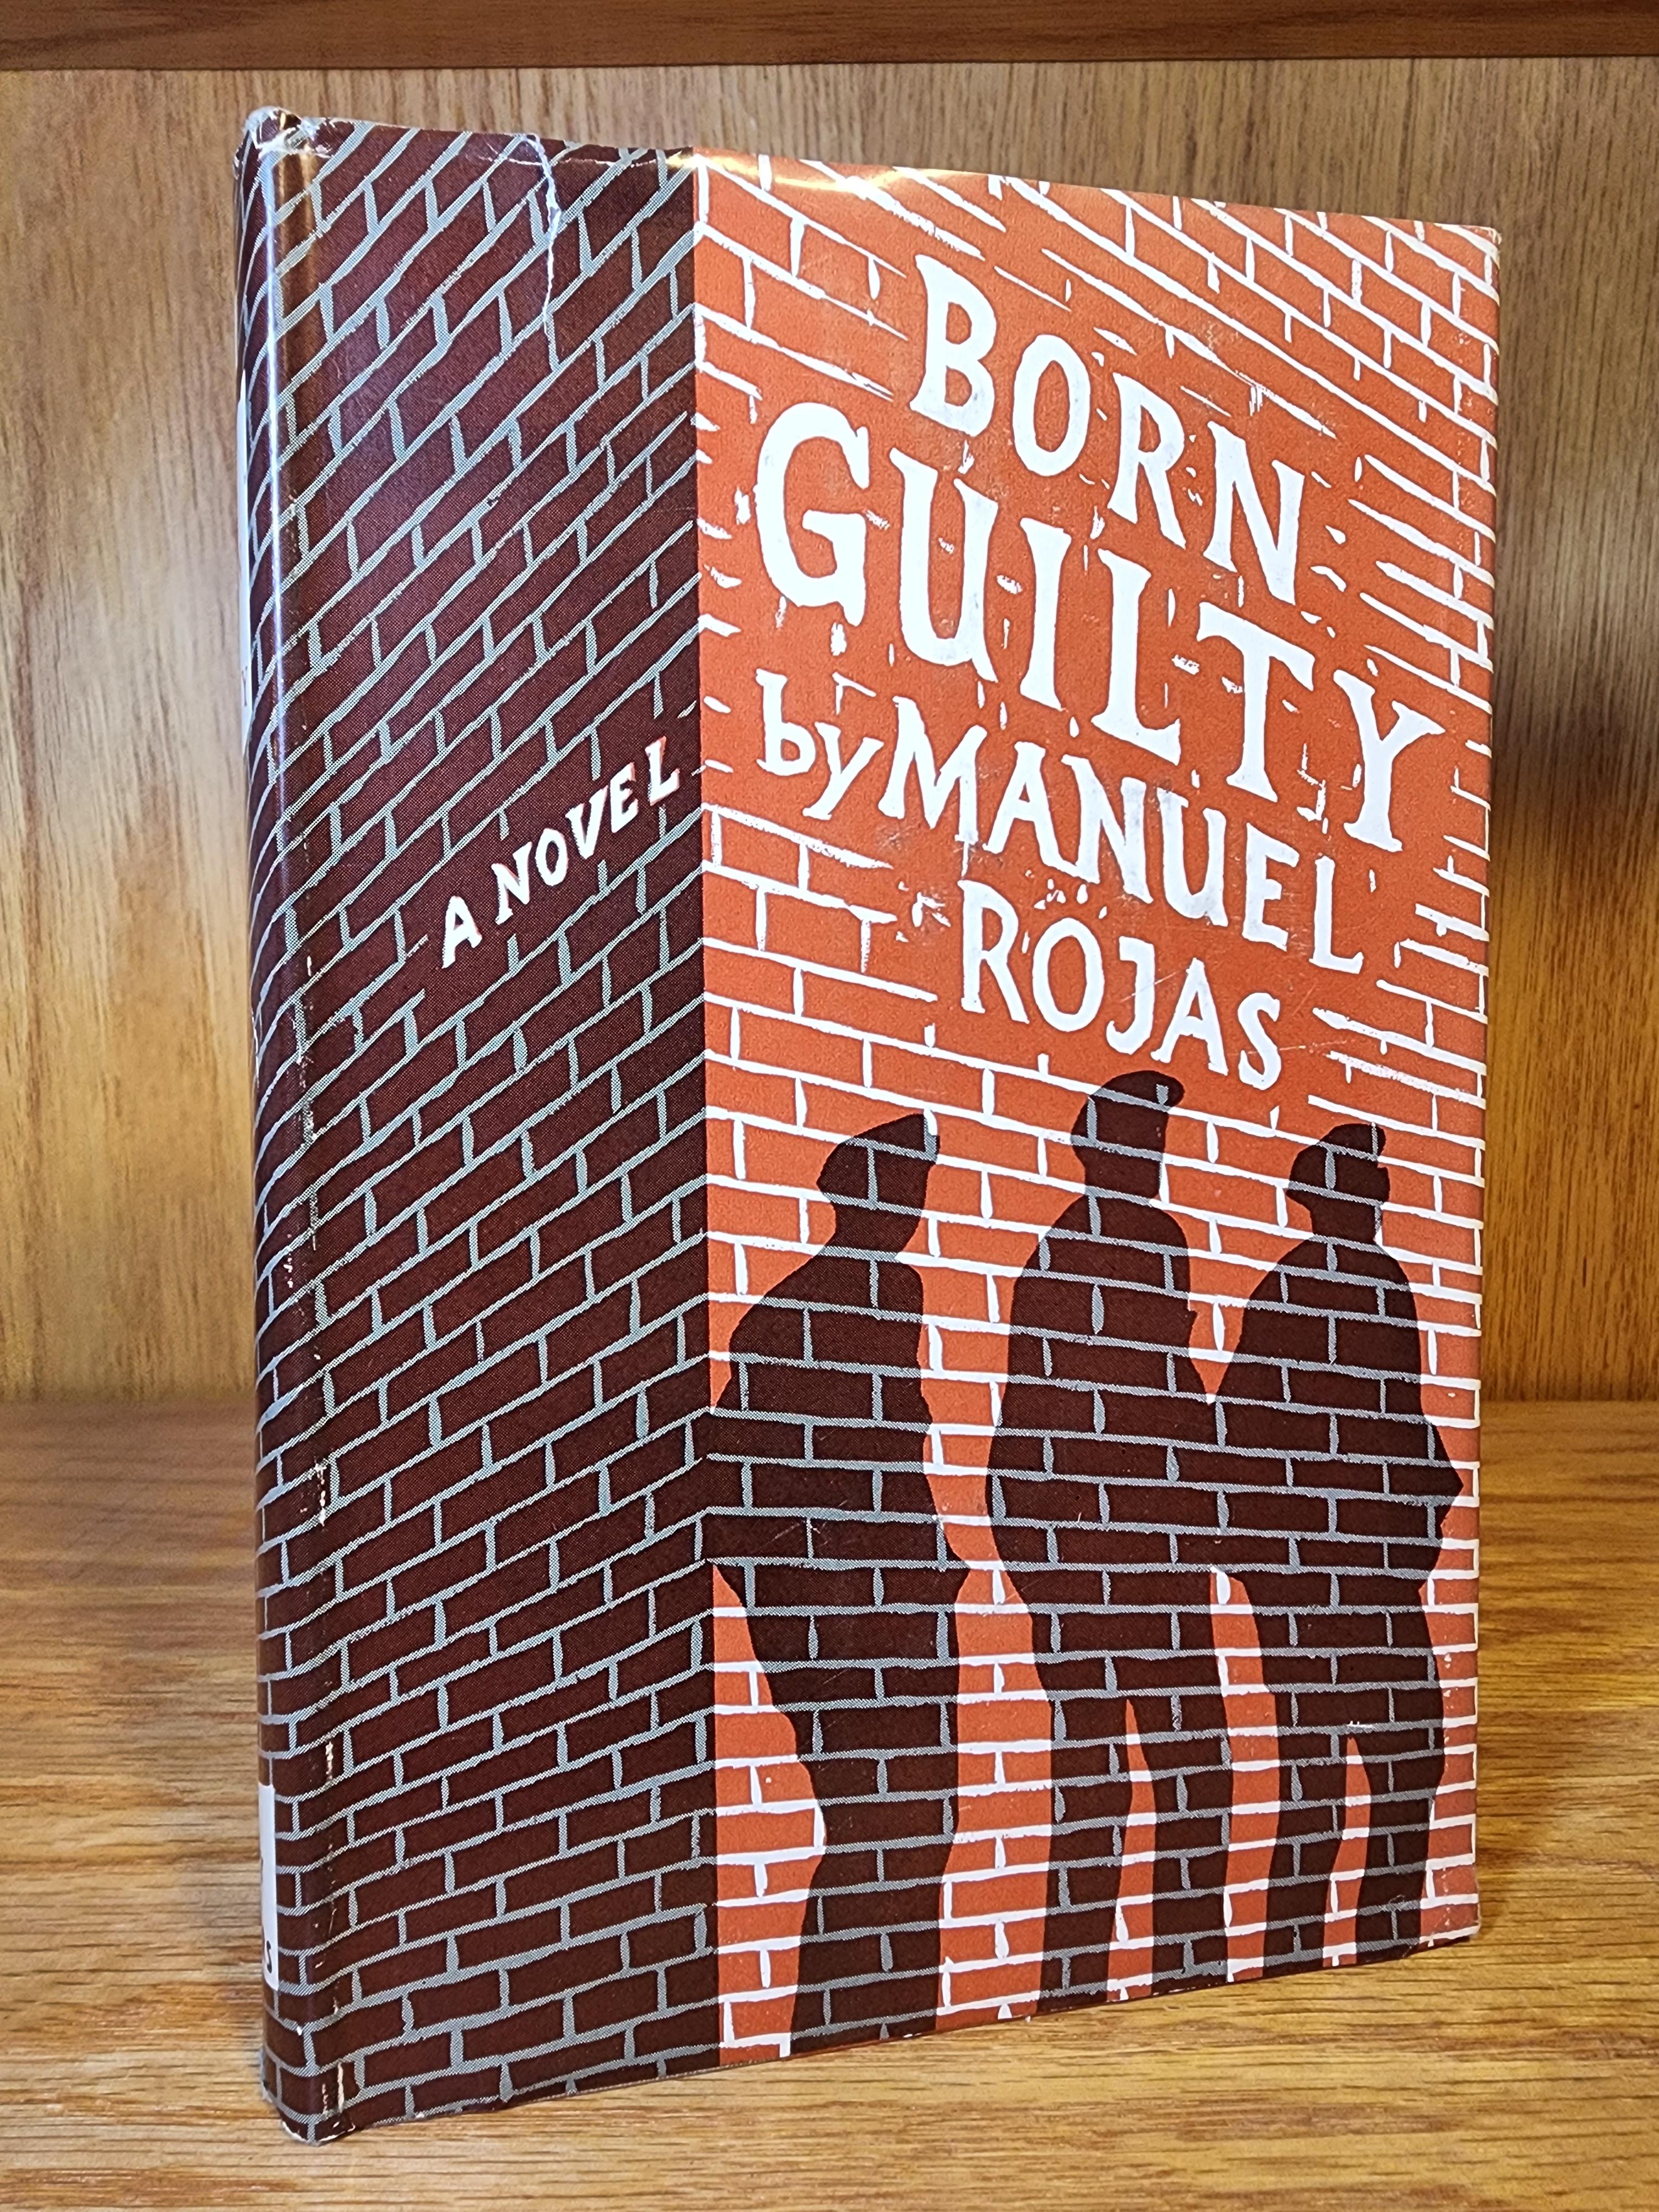 Born Guilty - Manuel Rojas, Translated by Frank Gaynor. First American Pressing, 1955 Hardcover